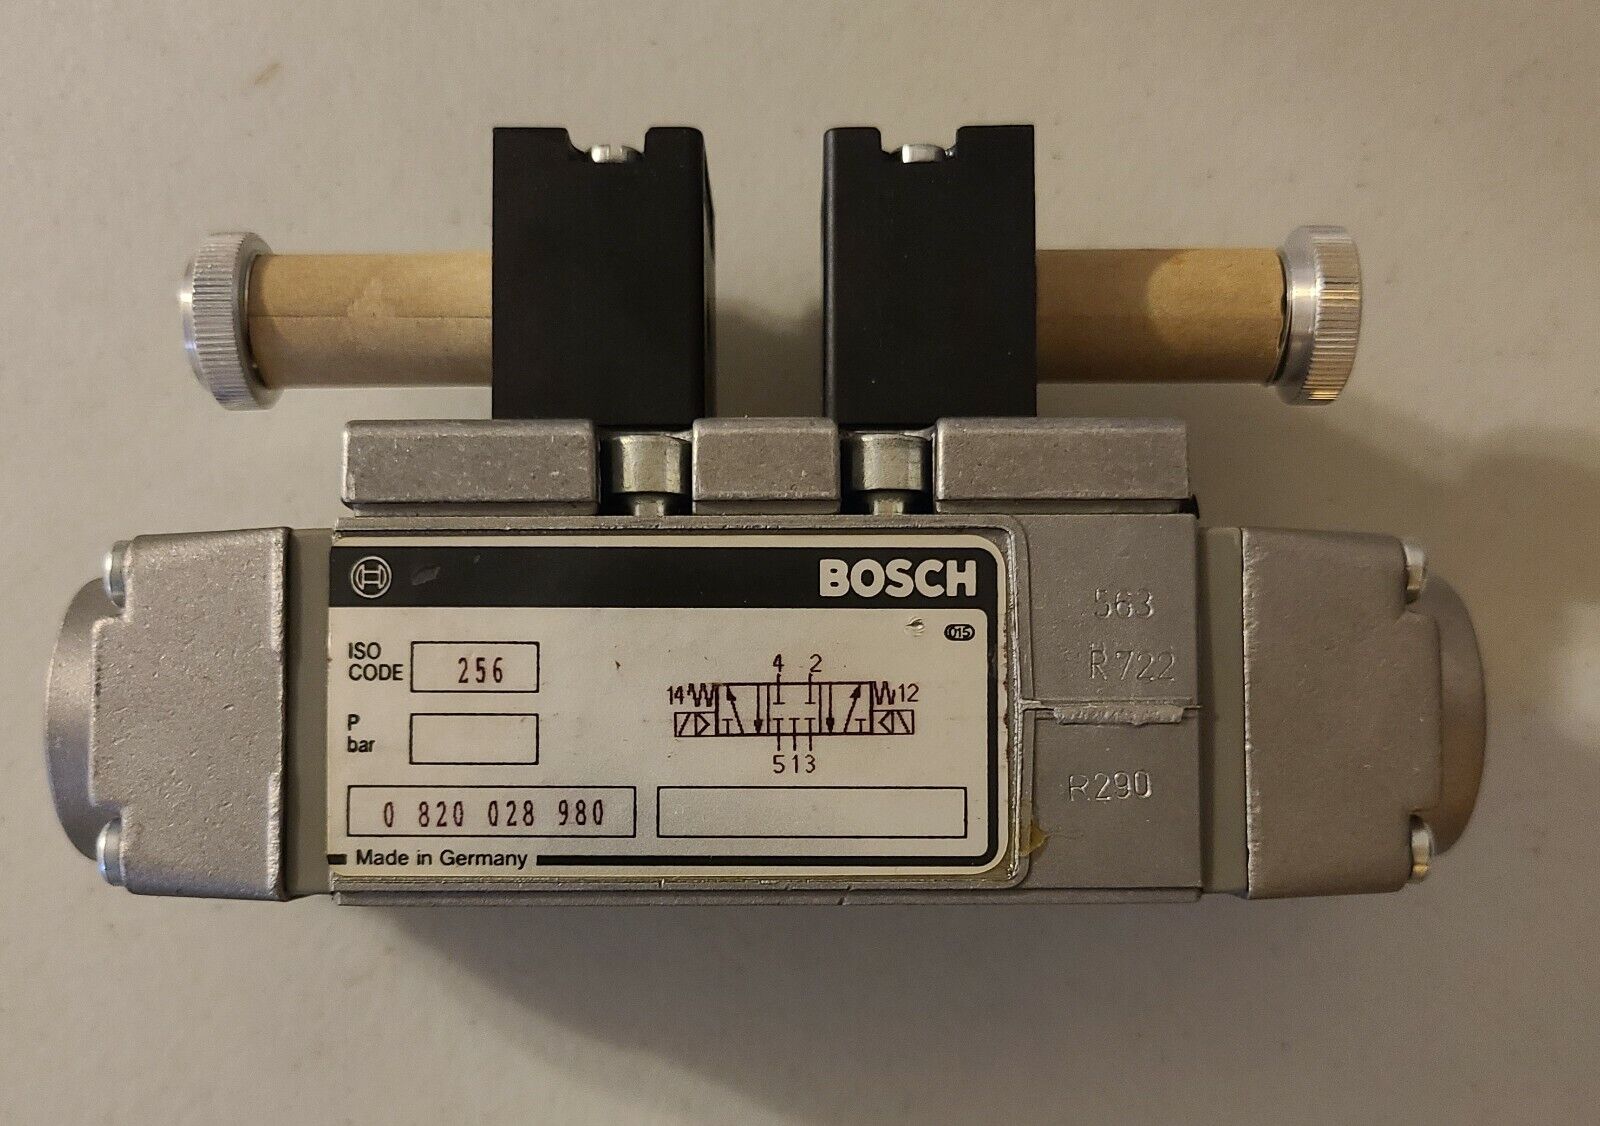 Bosch Rexroth, 4-Way, 3-Pos, Solenoid Operated, Subbase Mounted, ISO Air Valve